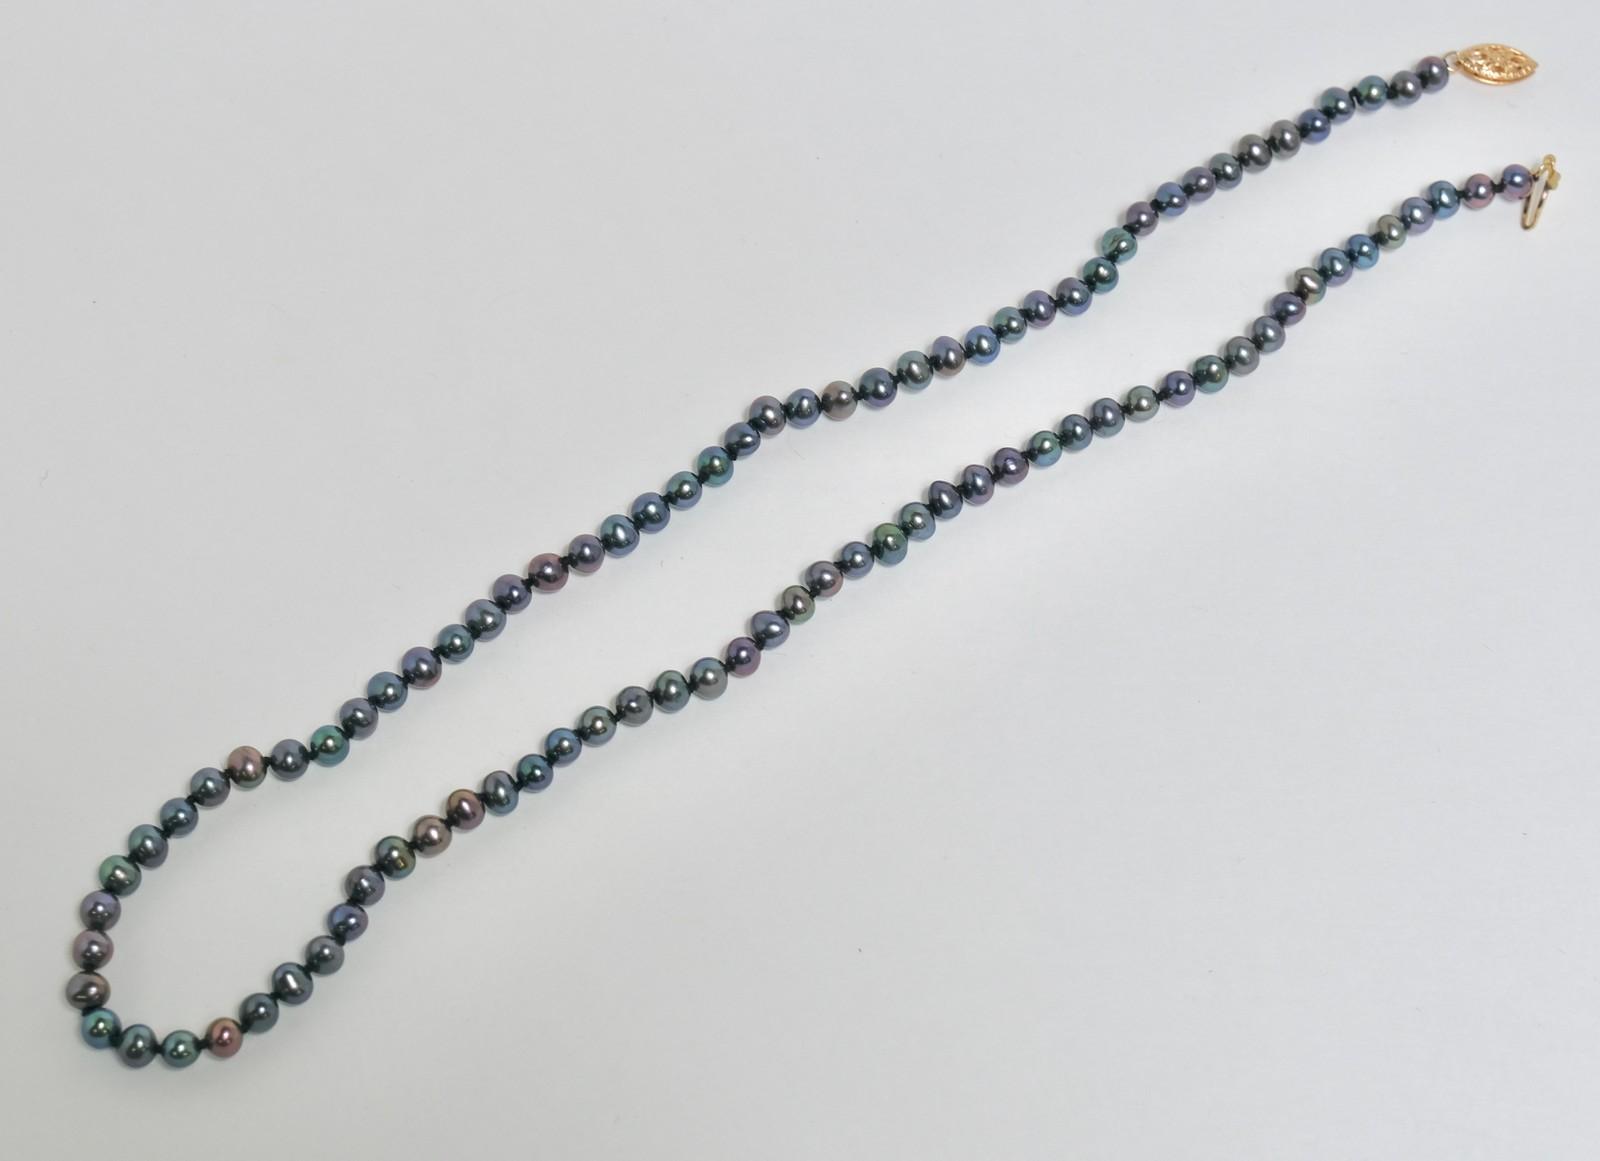 BLACK PEARL NECKLACE | OLD TOWN HALL AUCTION: FINE JEWELLERY, WATCHES ...